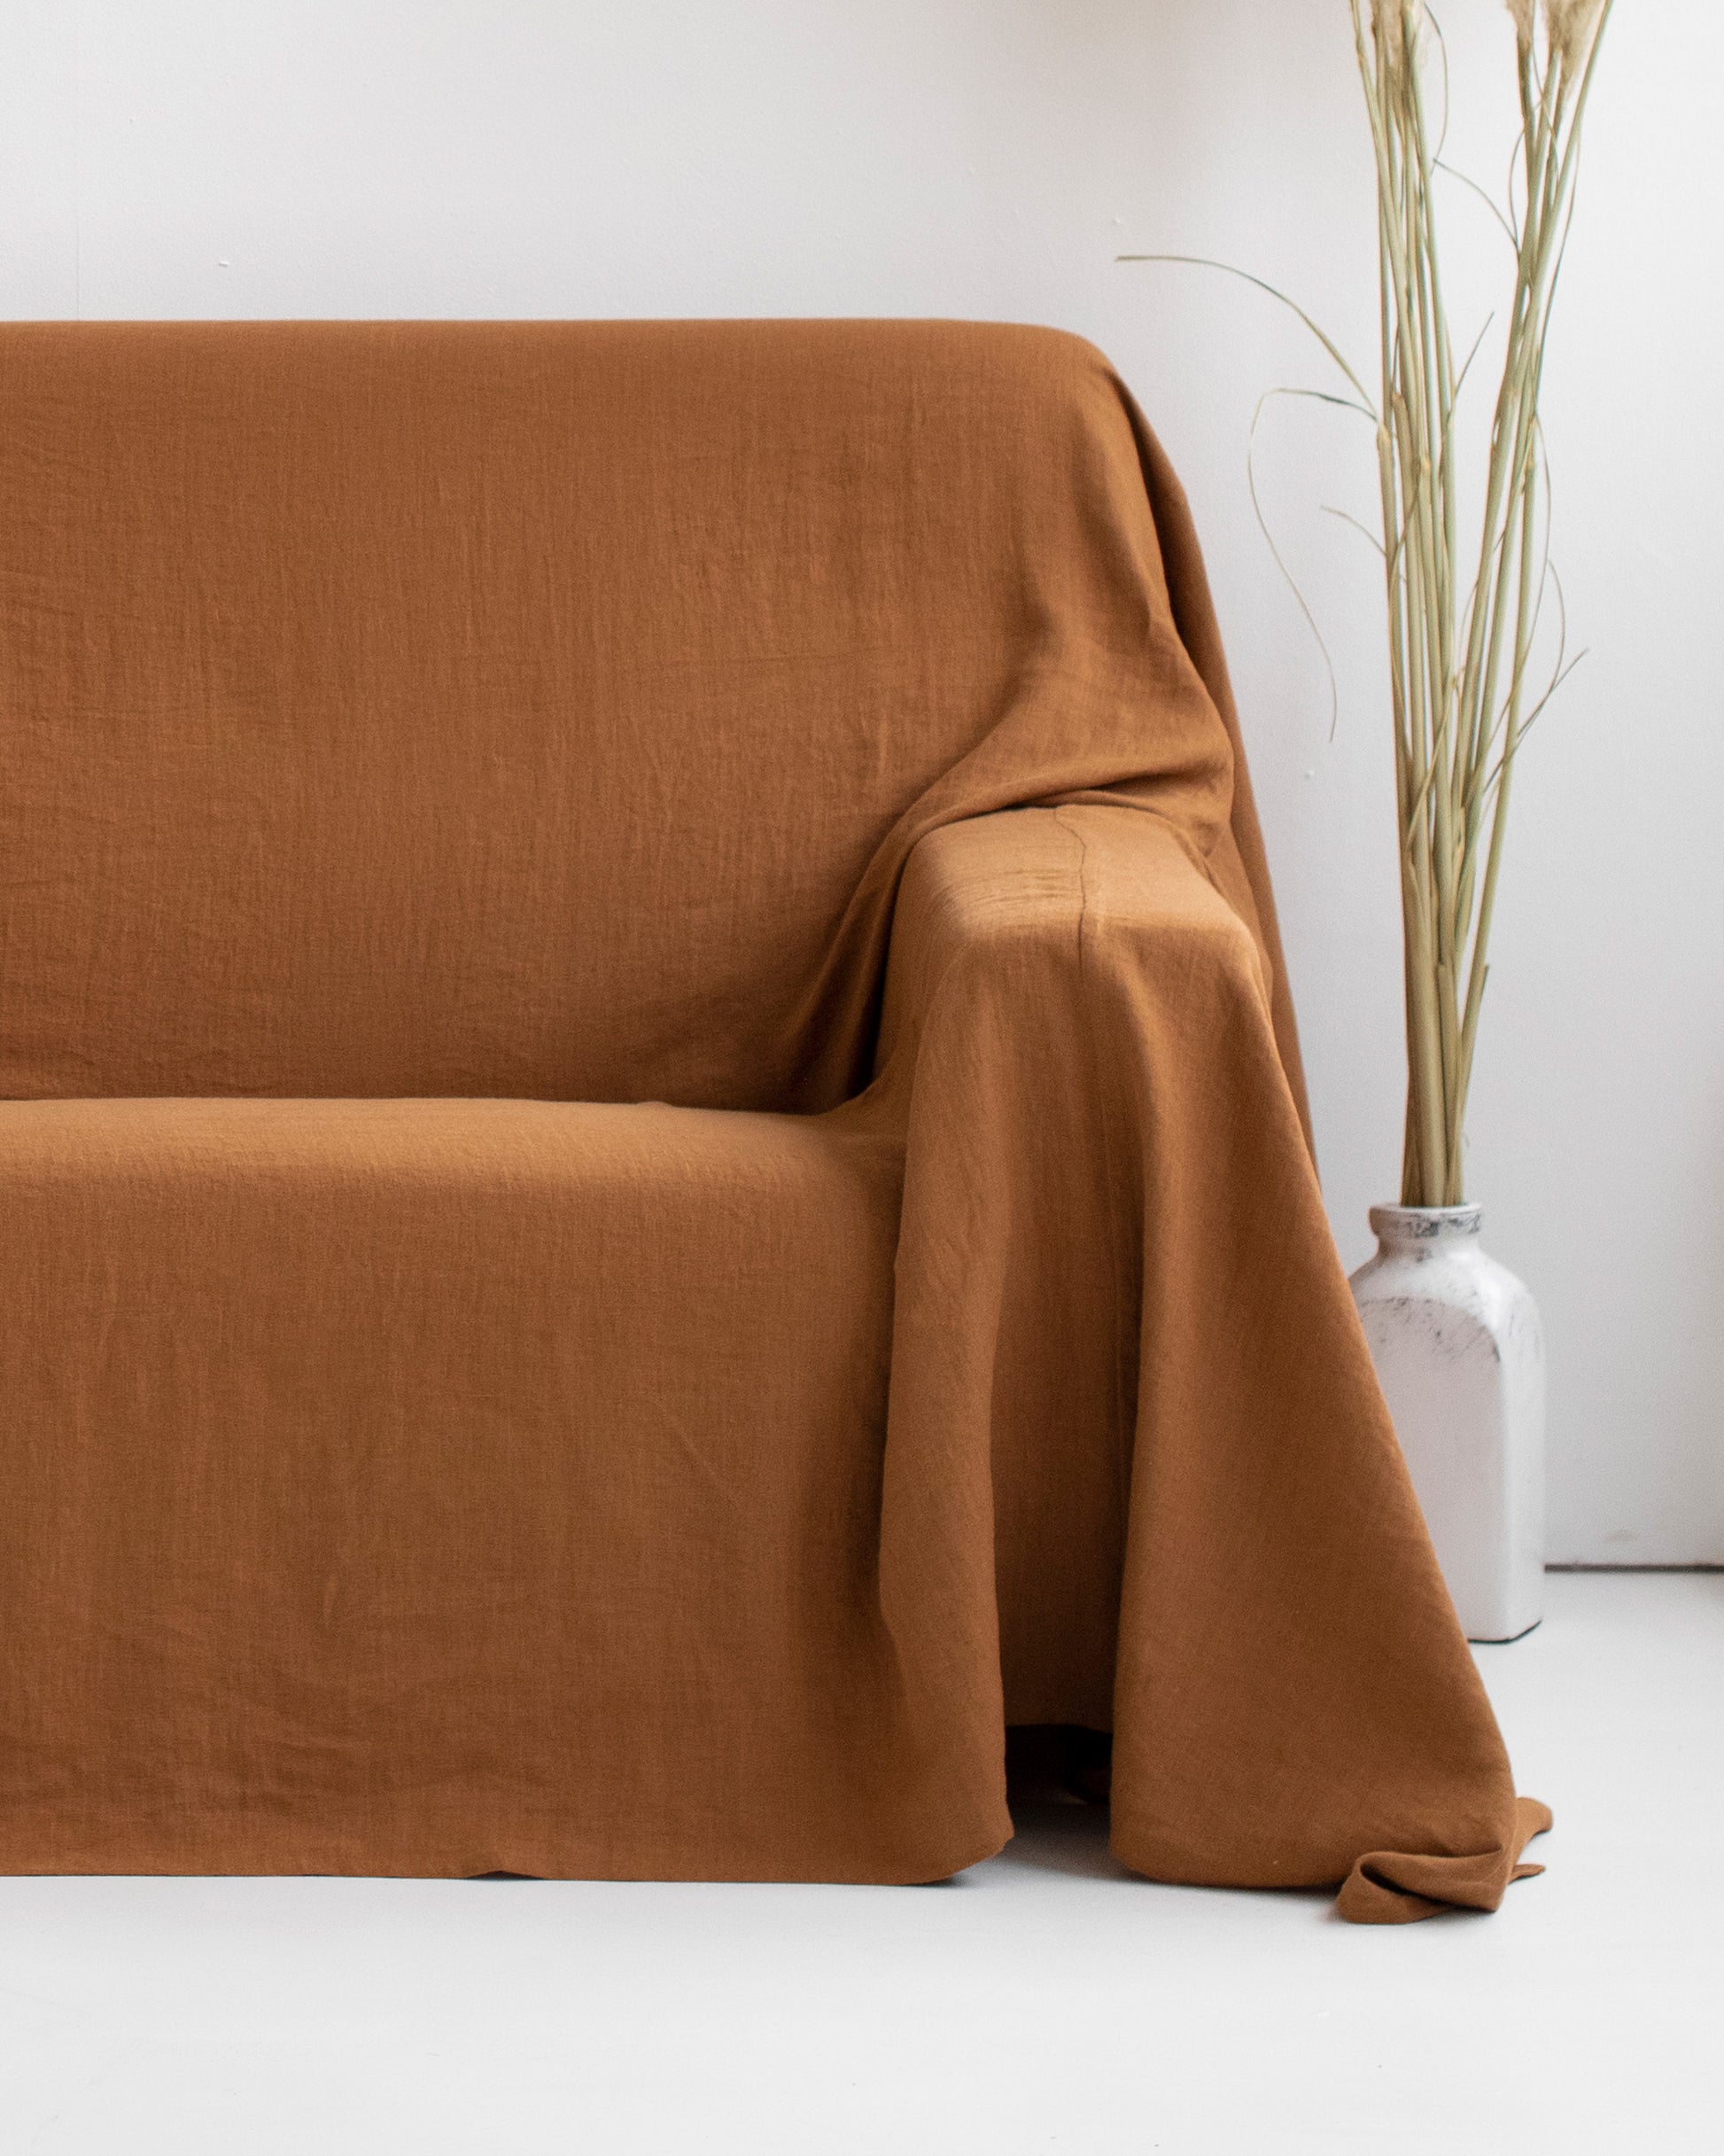 Linen couch cover in Cinnamon - MagicLinen